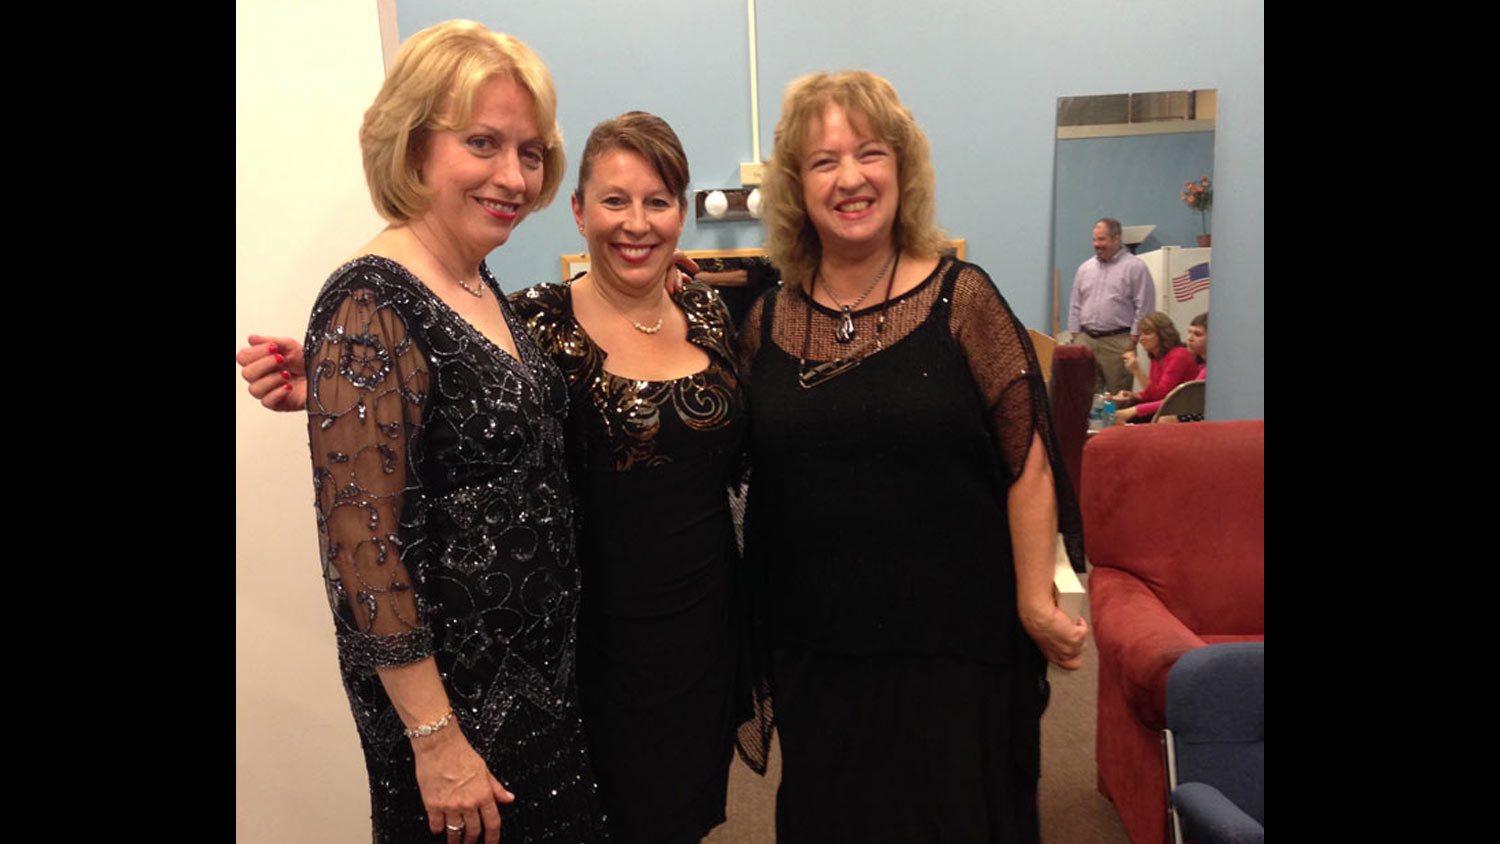   Backstage with singer Nancy Donnelly and pianist Peg Delaney before headlining a benefit concert for the Double H Ranch, Glens Falls, NY  